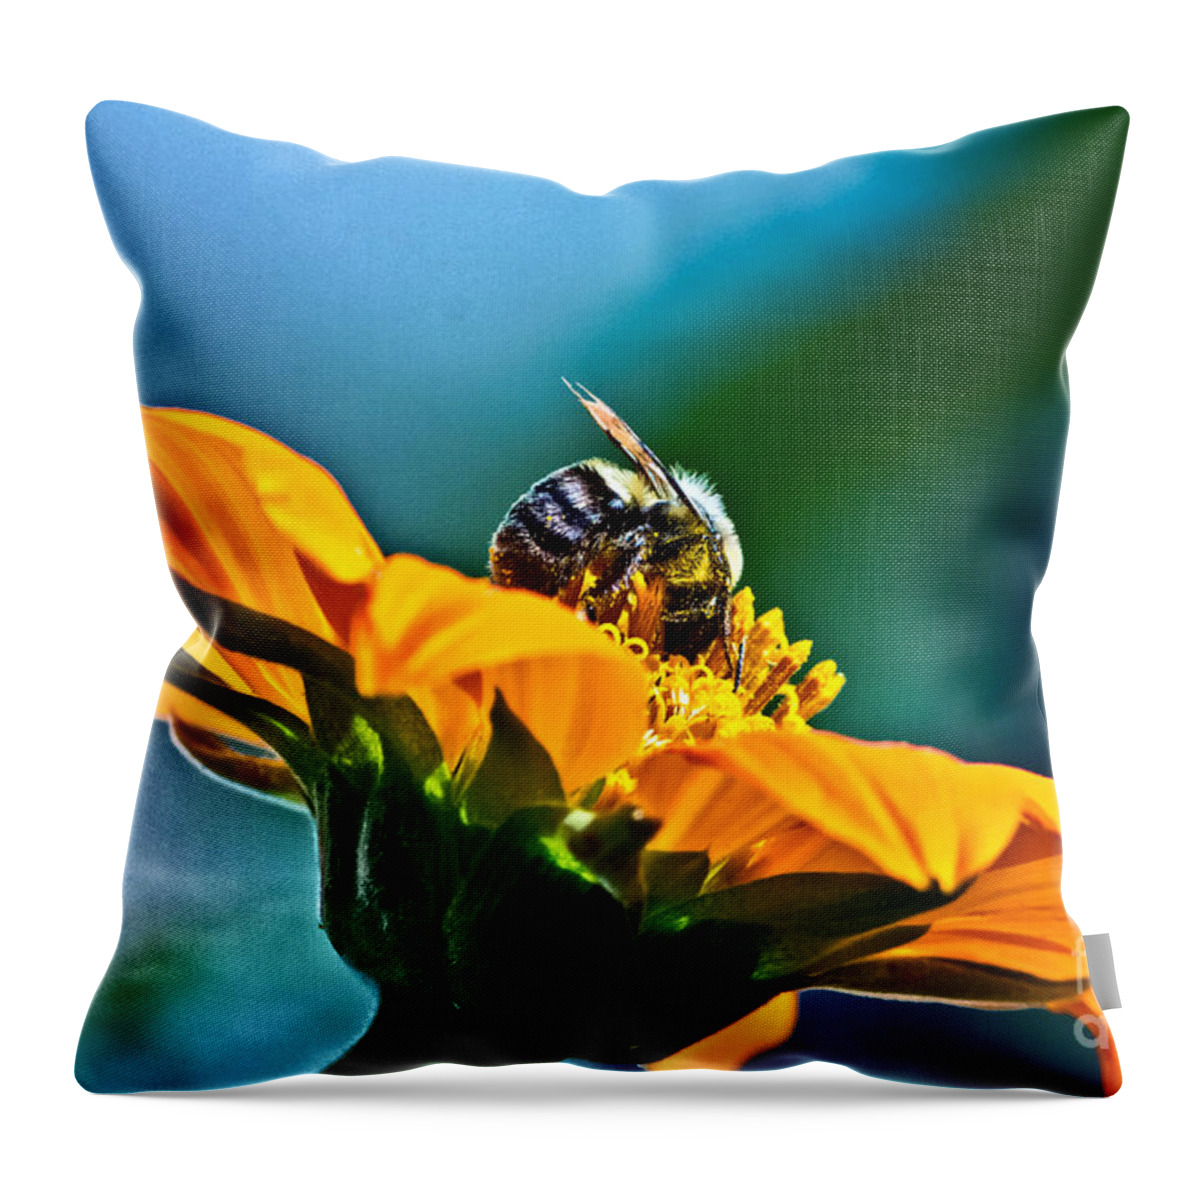 Insect Throw Pillow featuring the photograph Bumble Bee I by Ms Judi